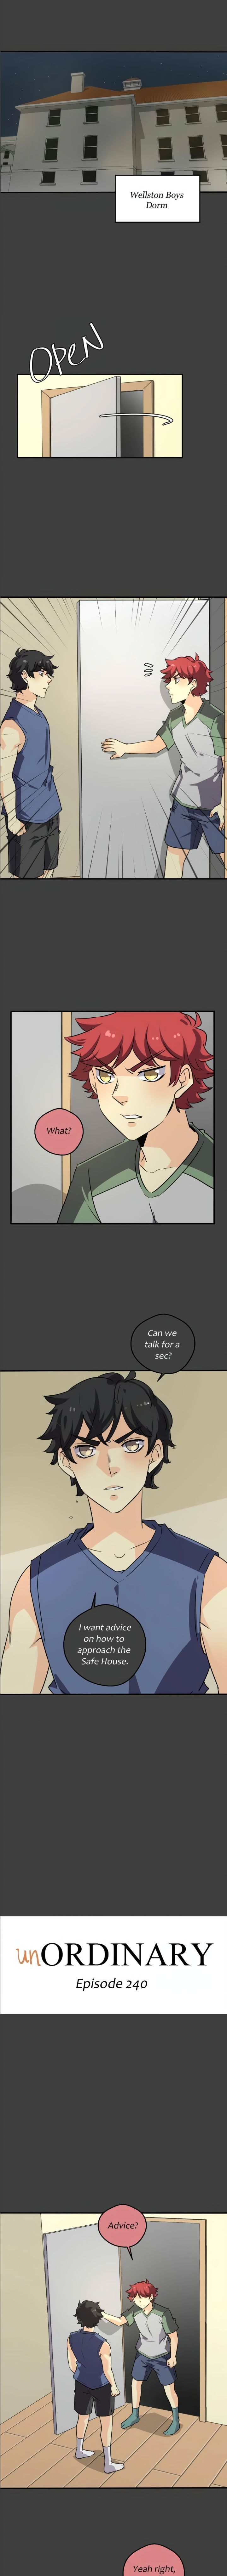 Unordinary Chapter 248 Page 1